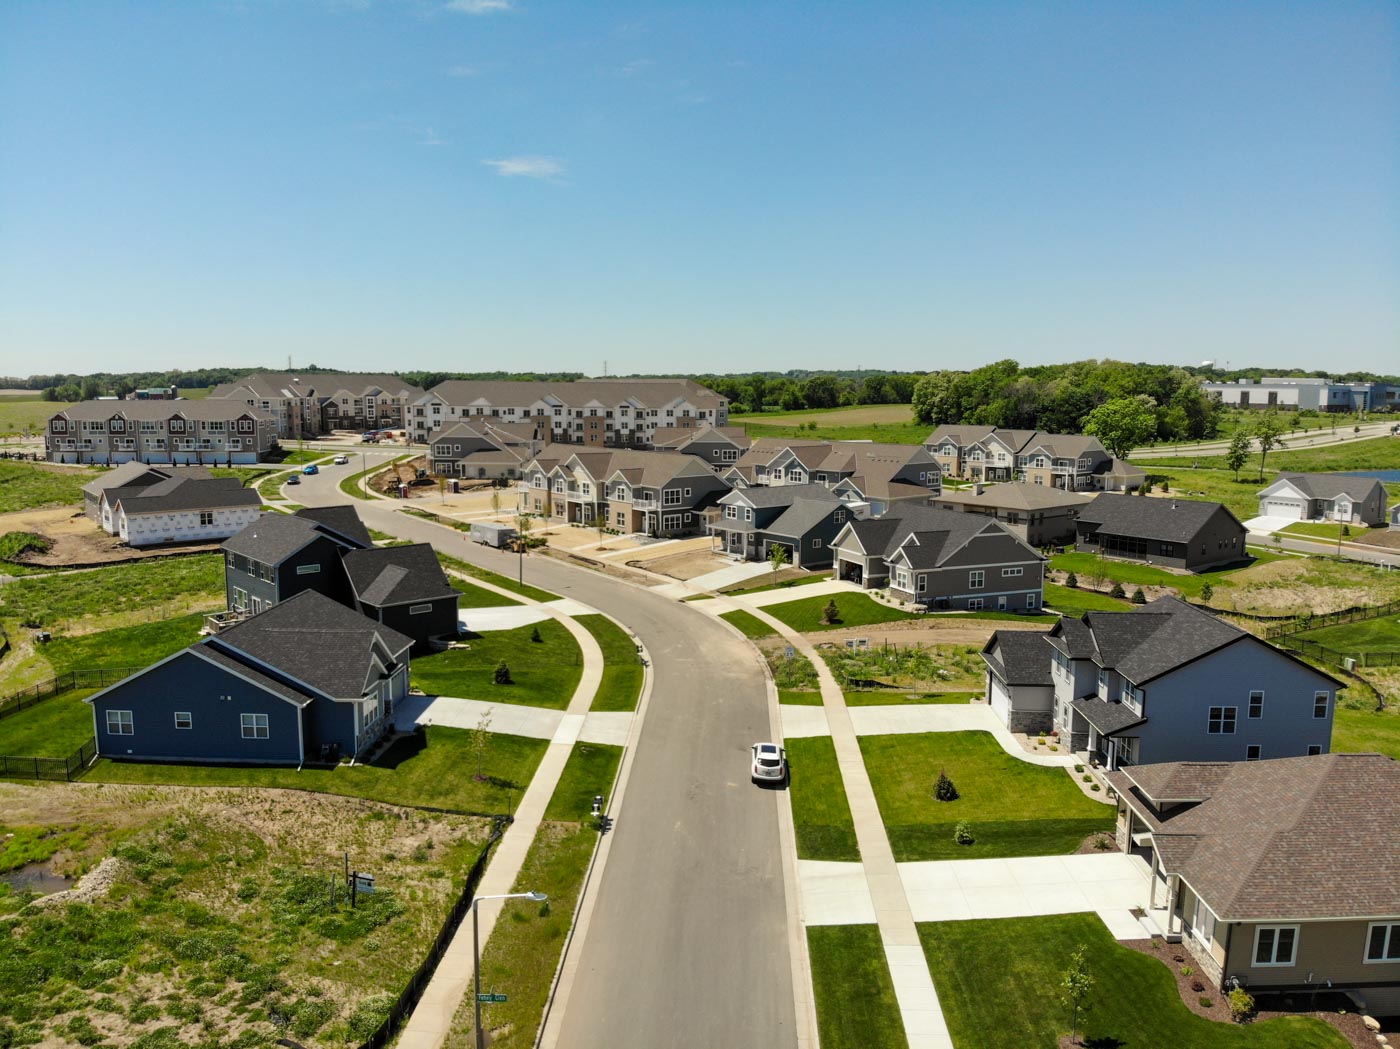 New housing development in Fahey Fields located in Fitchburg Wisconsin.